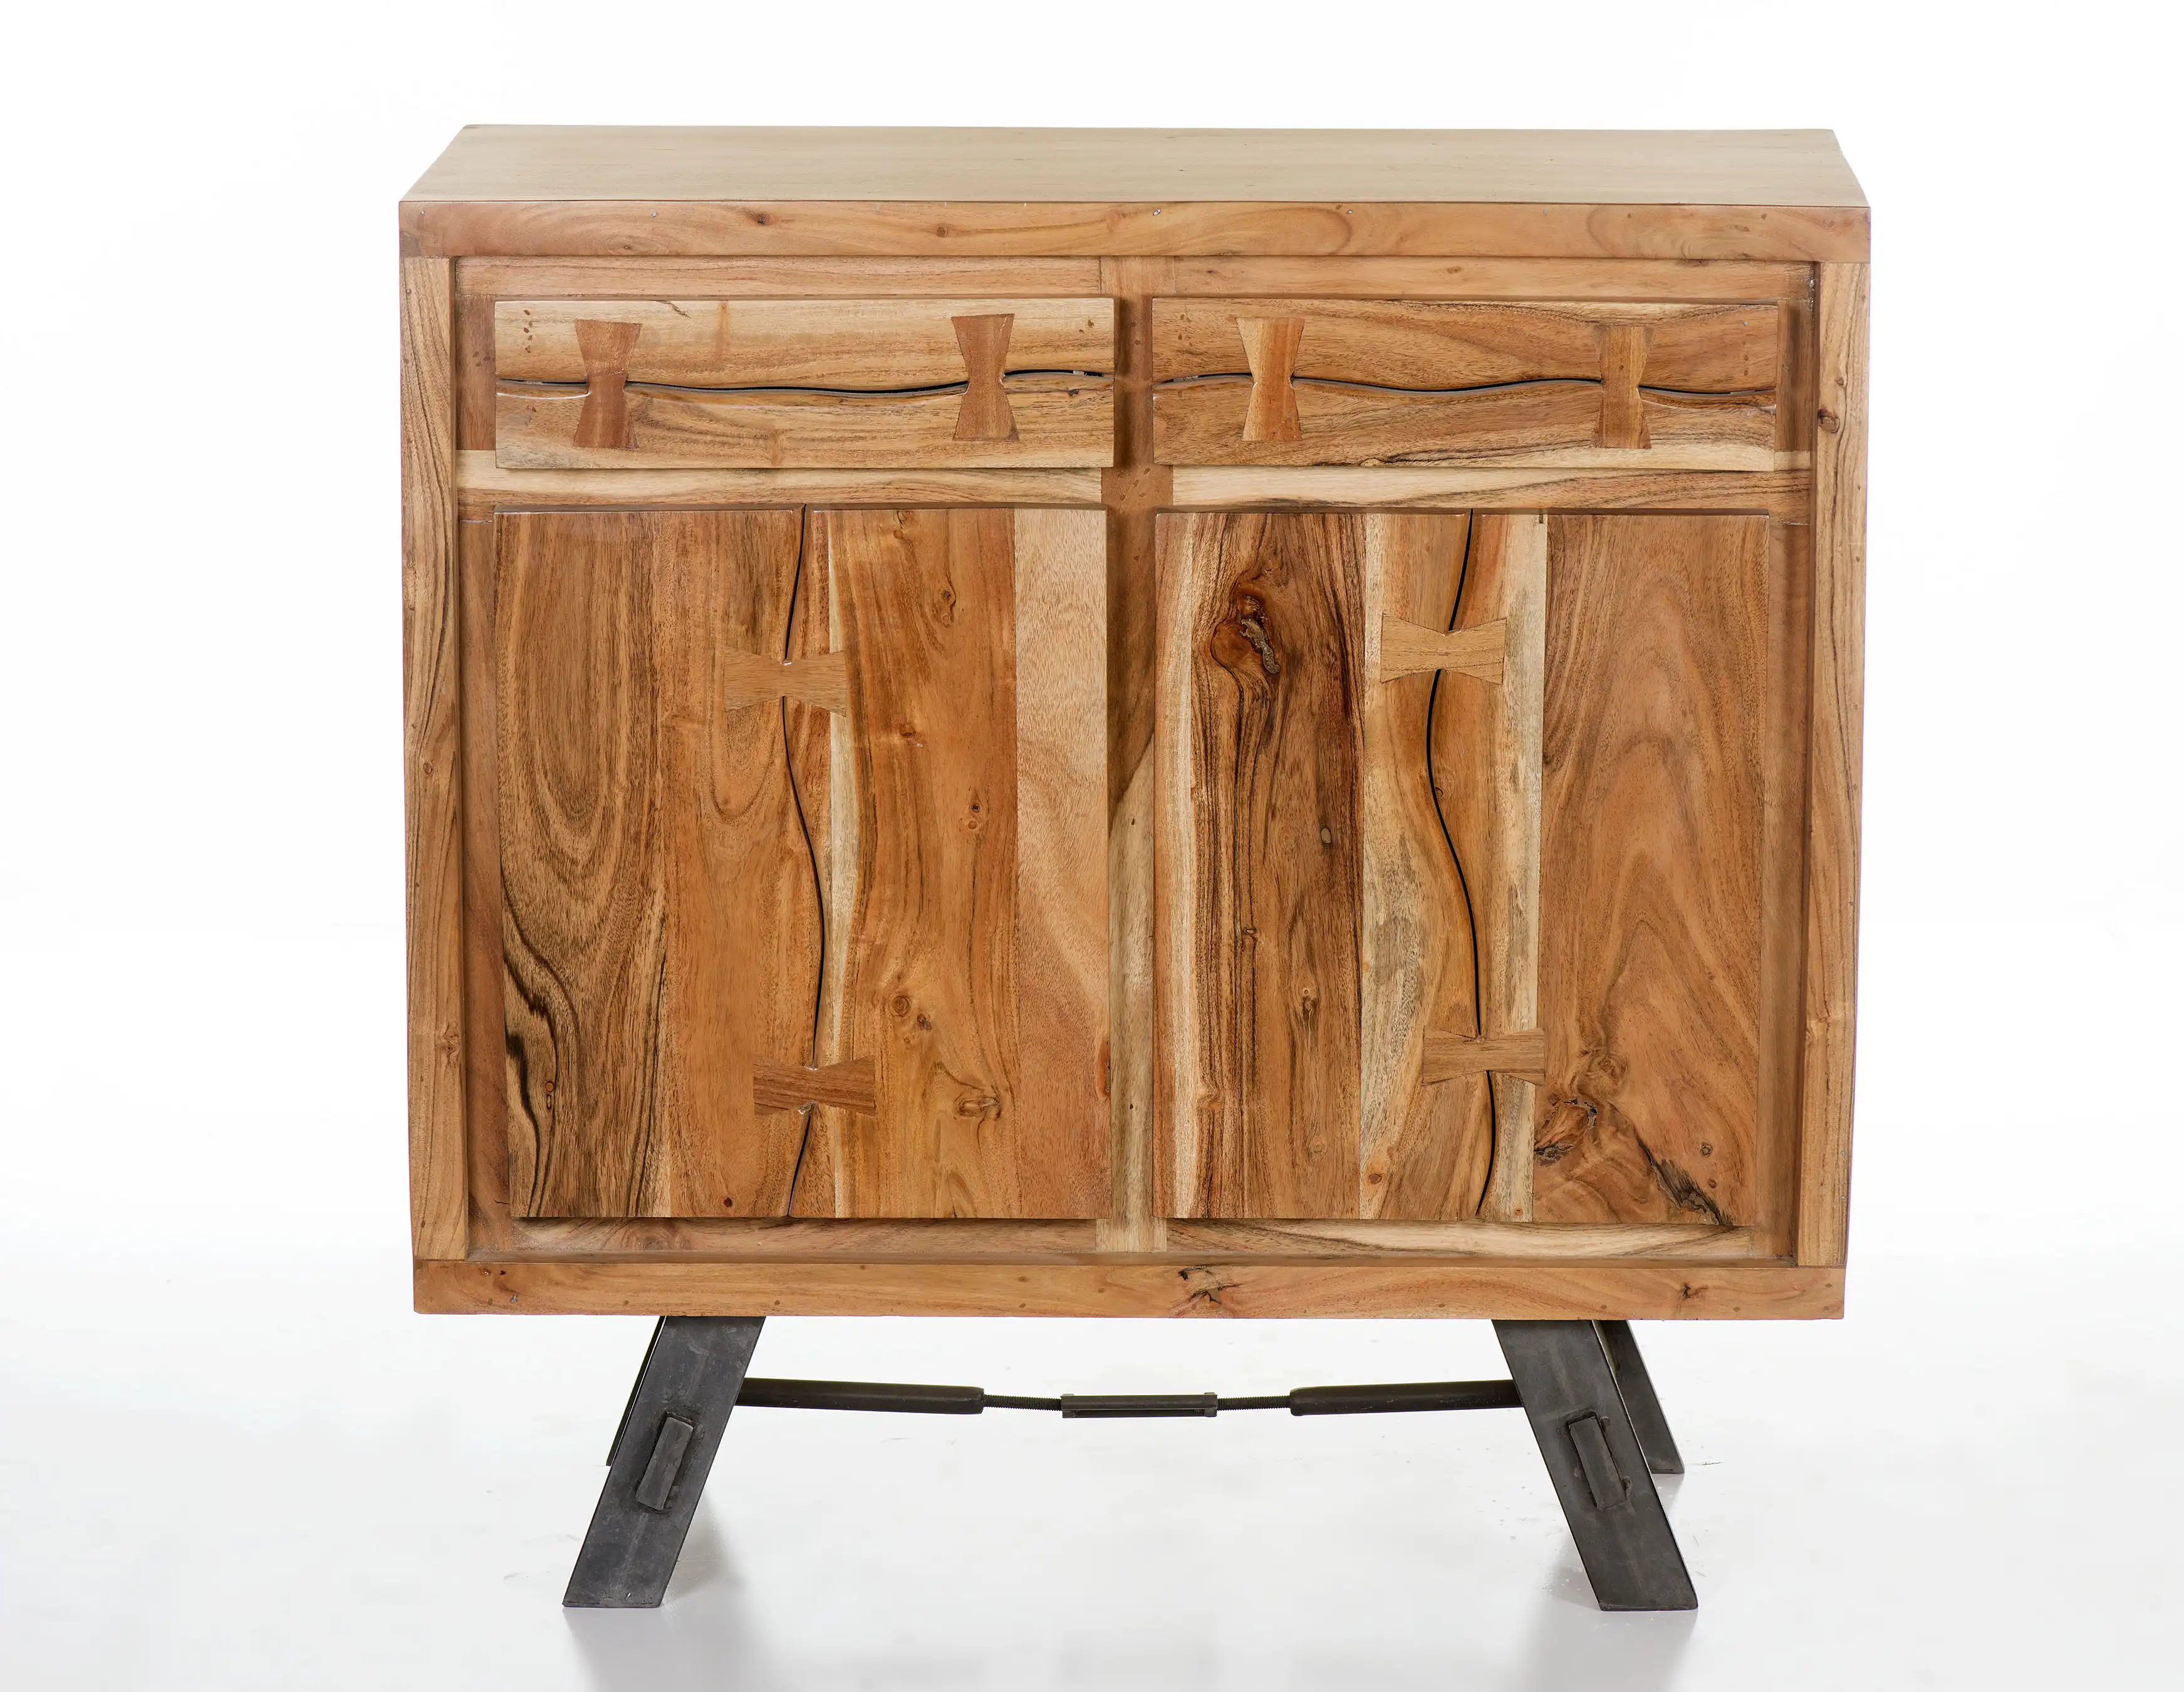 Acacia Wood Butterfly Sideboard with 2 Drawers & 2 Doors
(KD) - popular handicrafts